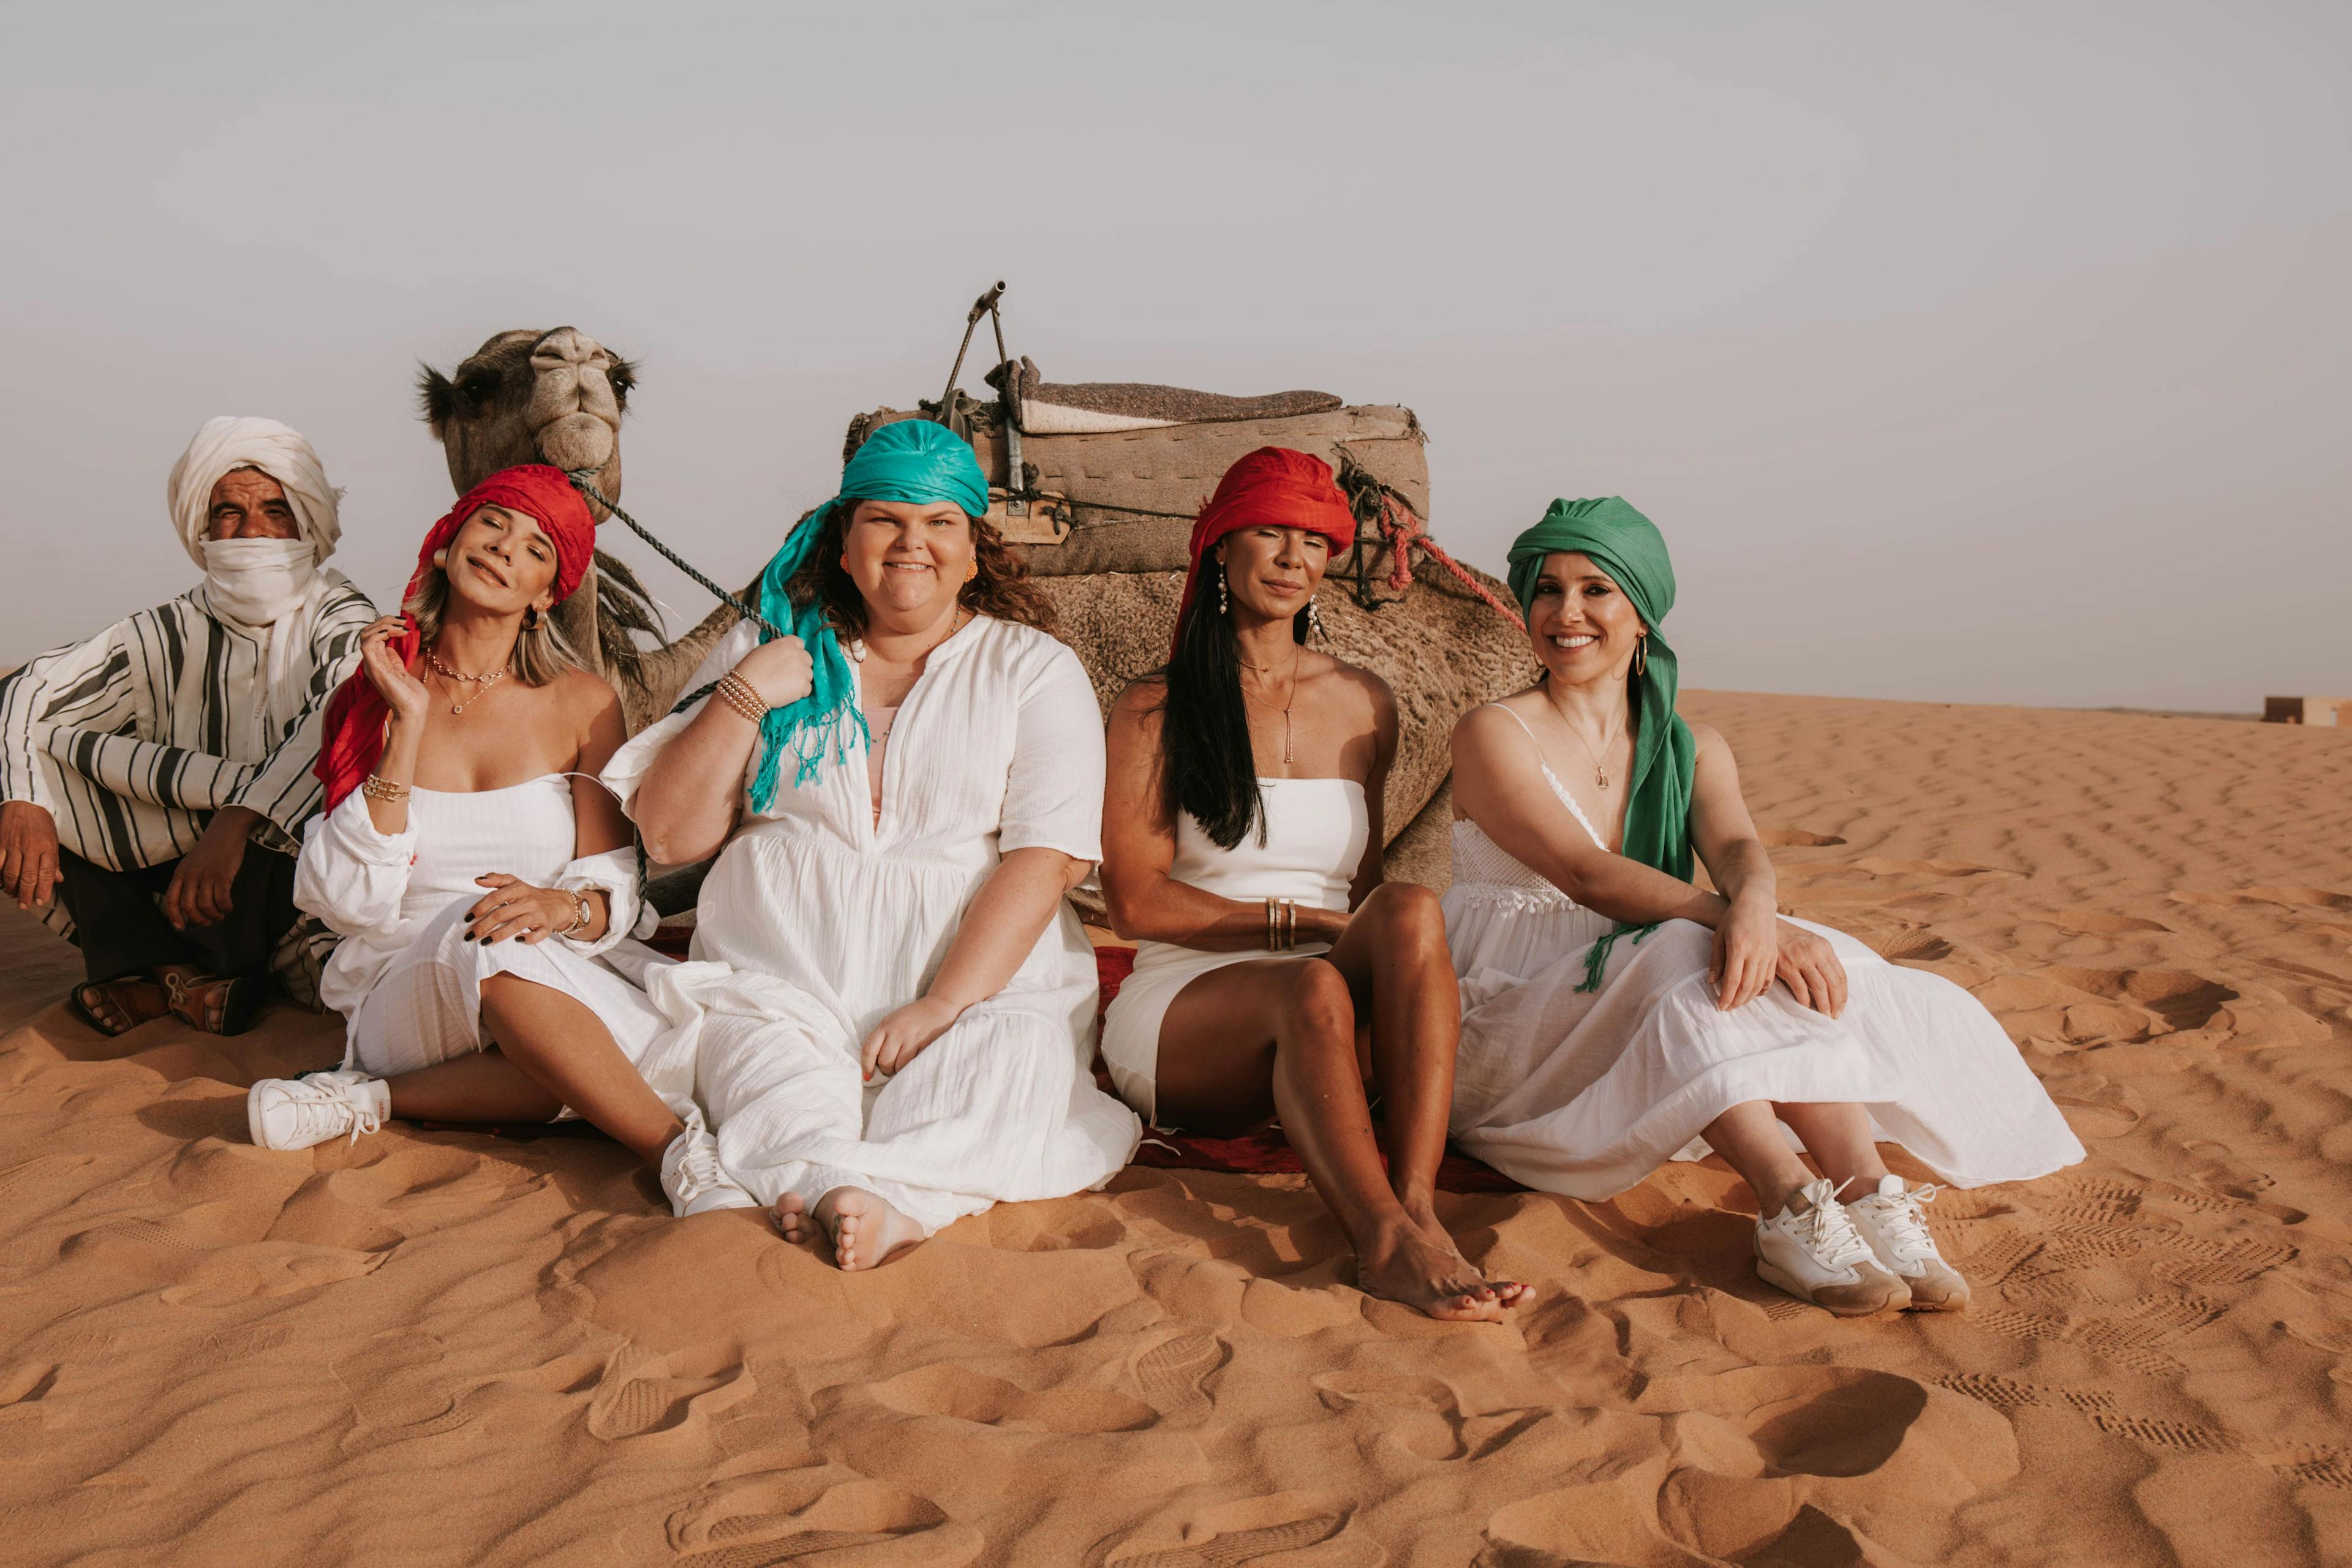 3 Day - 2 Overnight camp experience from Fes to Marrakech